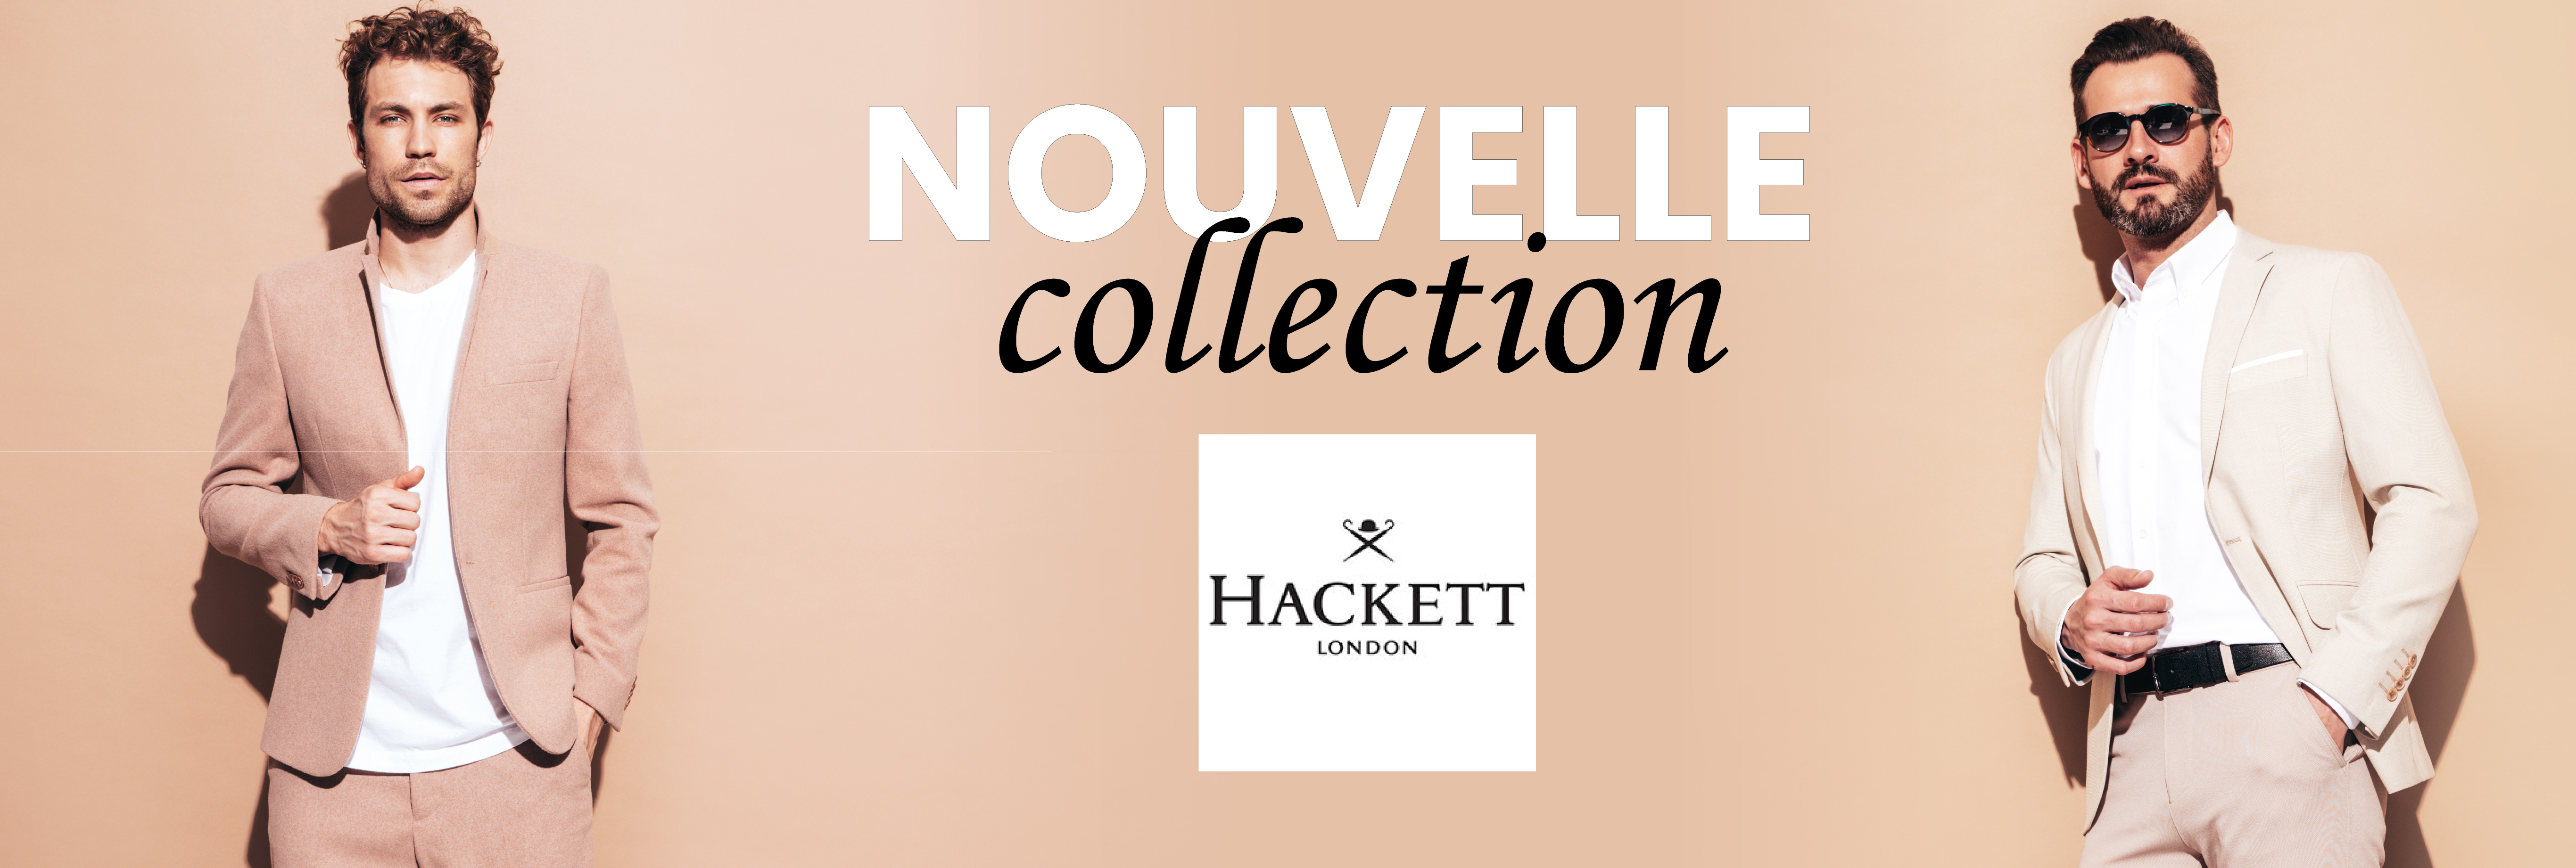 nouvelle_collection_hackett